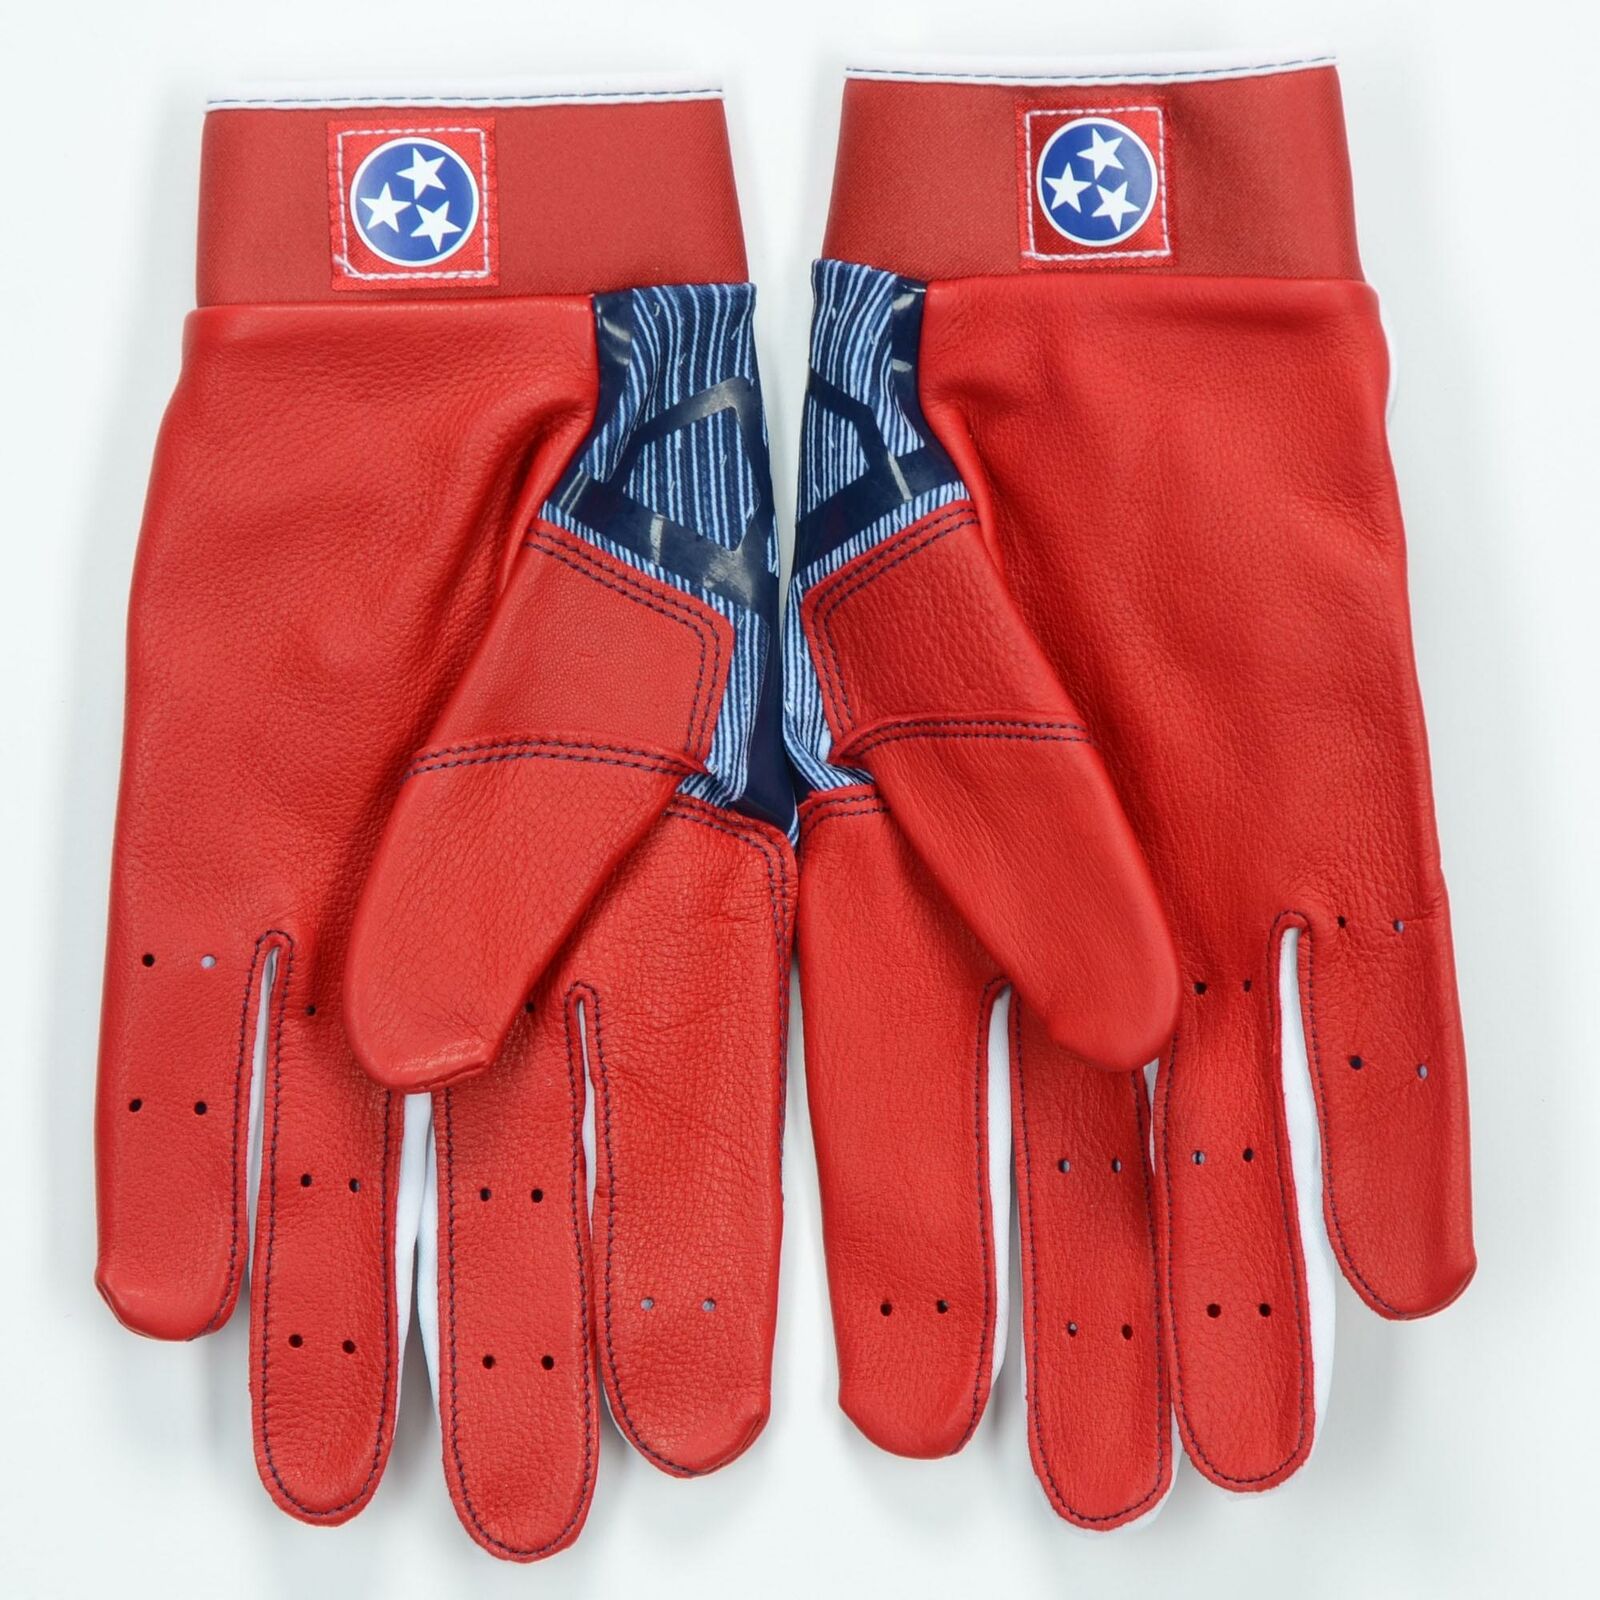 Mookie Betts Boston Red Sox Player-issued Red And Blue Nike Gloves - 2018 Season